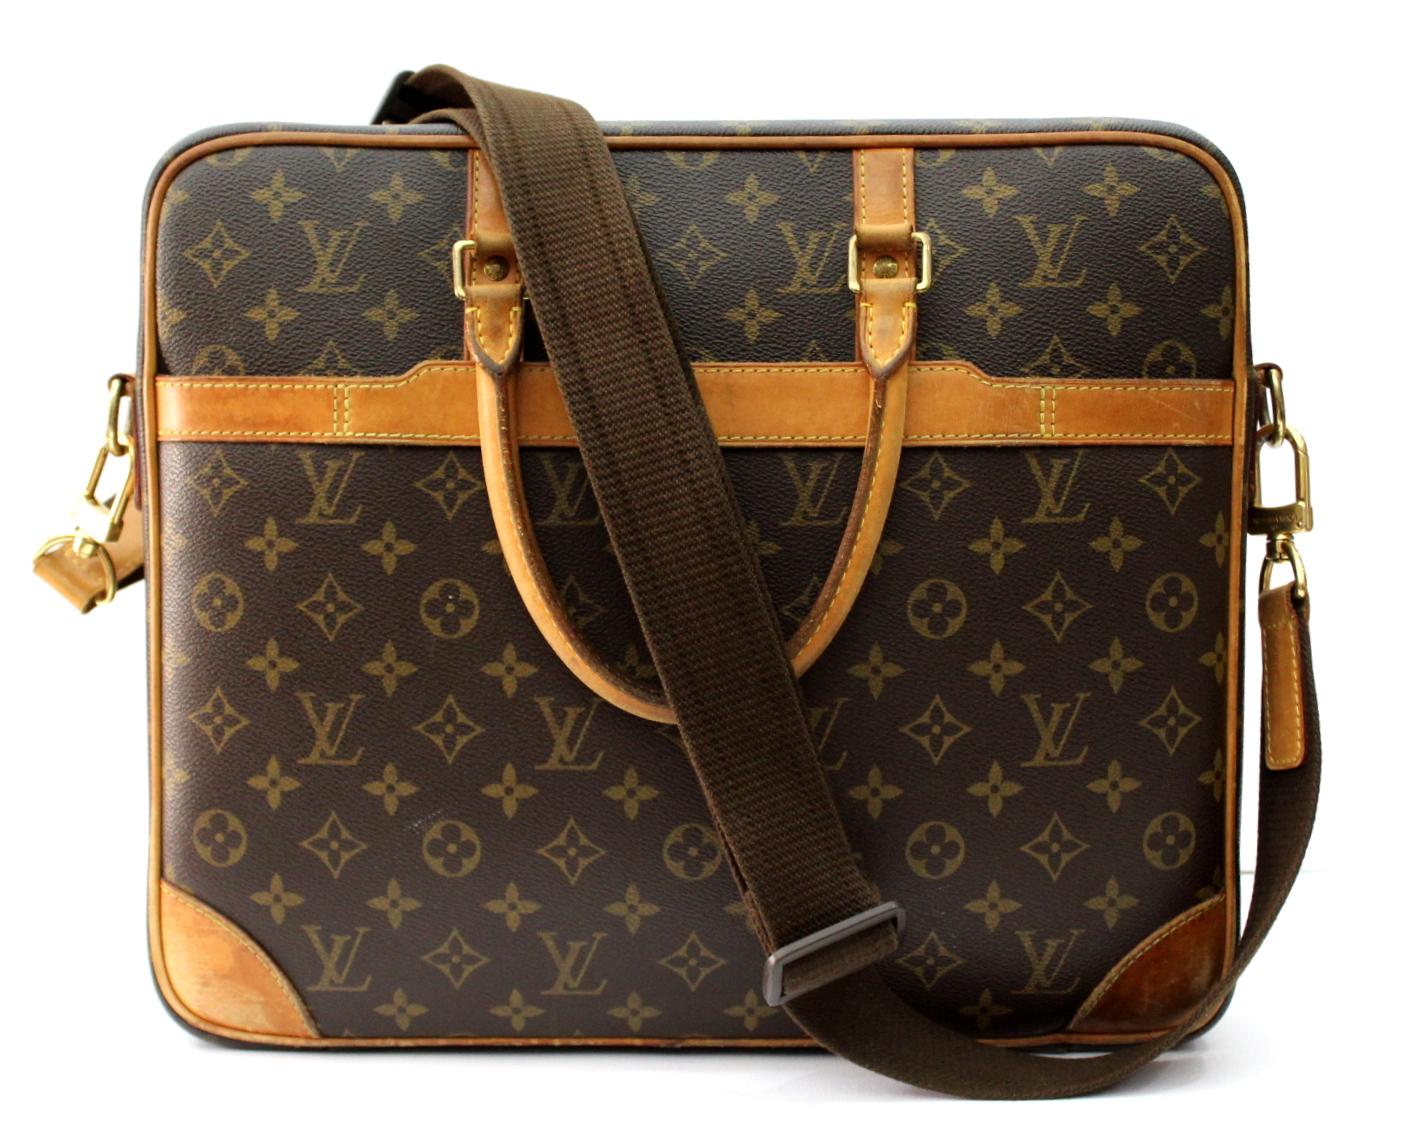 Louis Vuitton Ideal for business travelers, the Icare in Monogram canvas with the classic leather nametag and iconic stripes assures that you will always travel in style. It’s ultra-functional with numerous compartments for a laptop, files or even